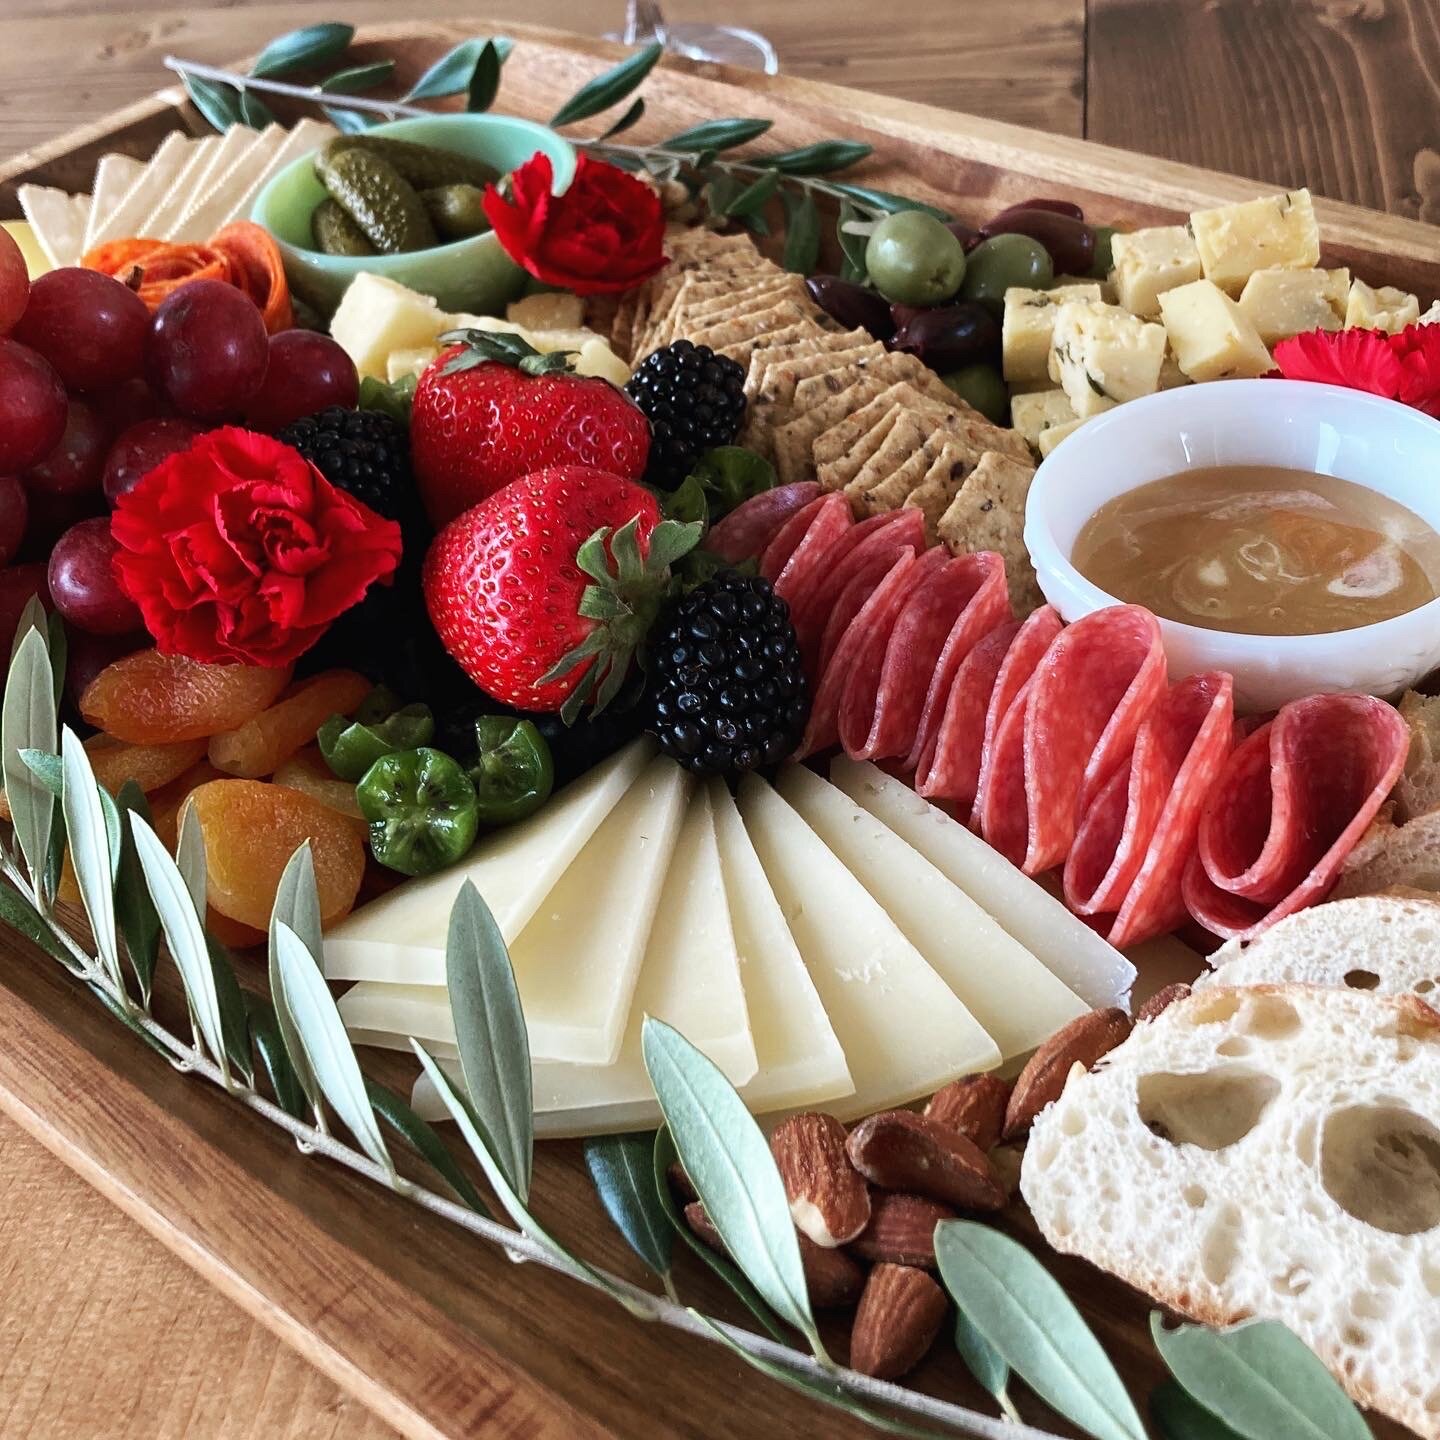 MADE IN MEXICO Model Mexican Wooden Handmade CHEESE BOARD in artisan work Ideal Charcuterie Platter & Serving Tray for Wine and snacks Heritage Embroidery